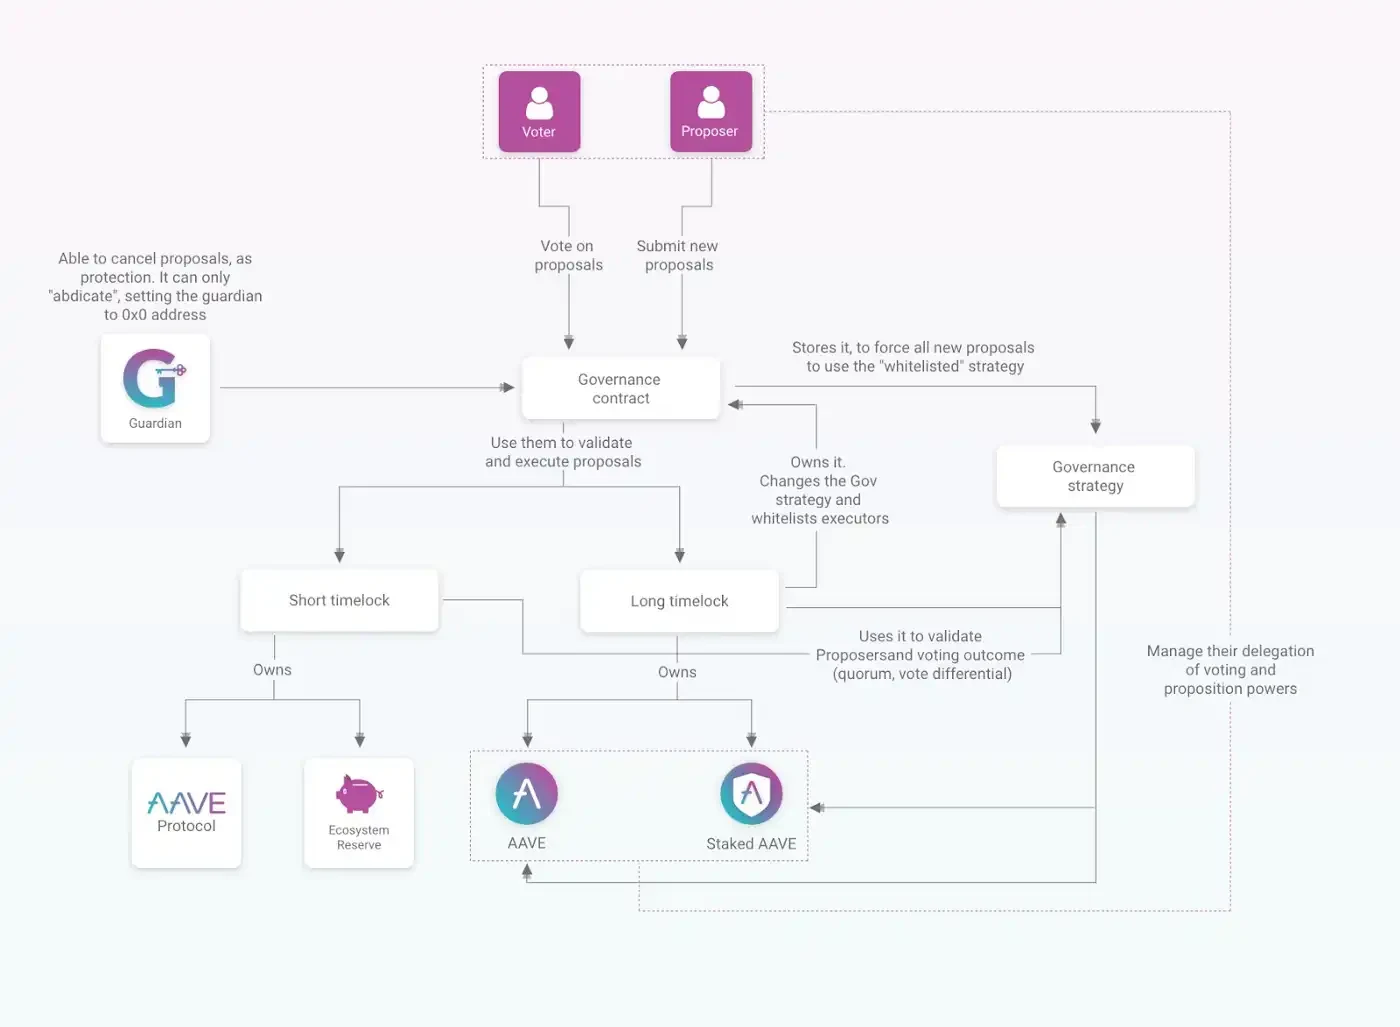 A flow chart showing the entire process for submitting and voting on new proposals to the Aave protocol.